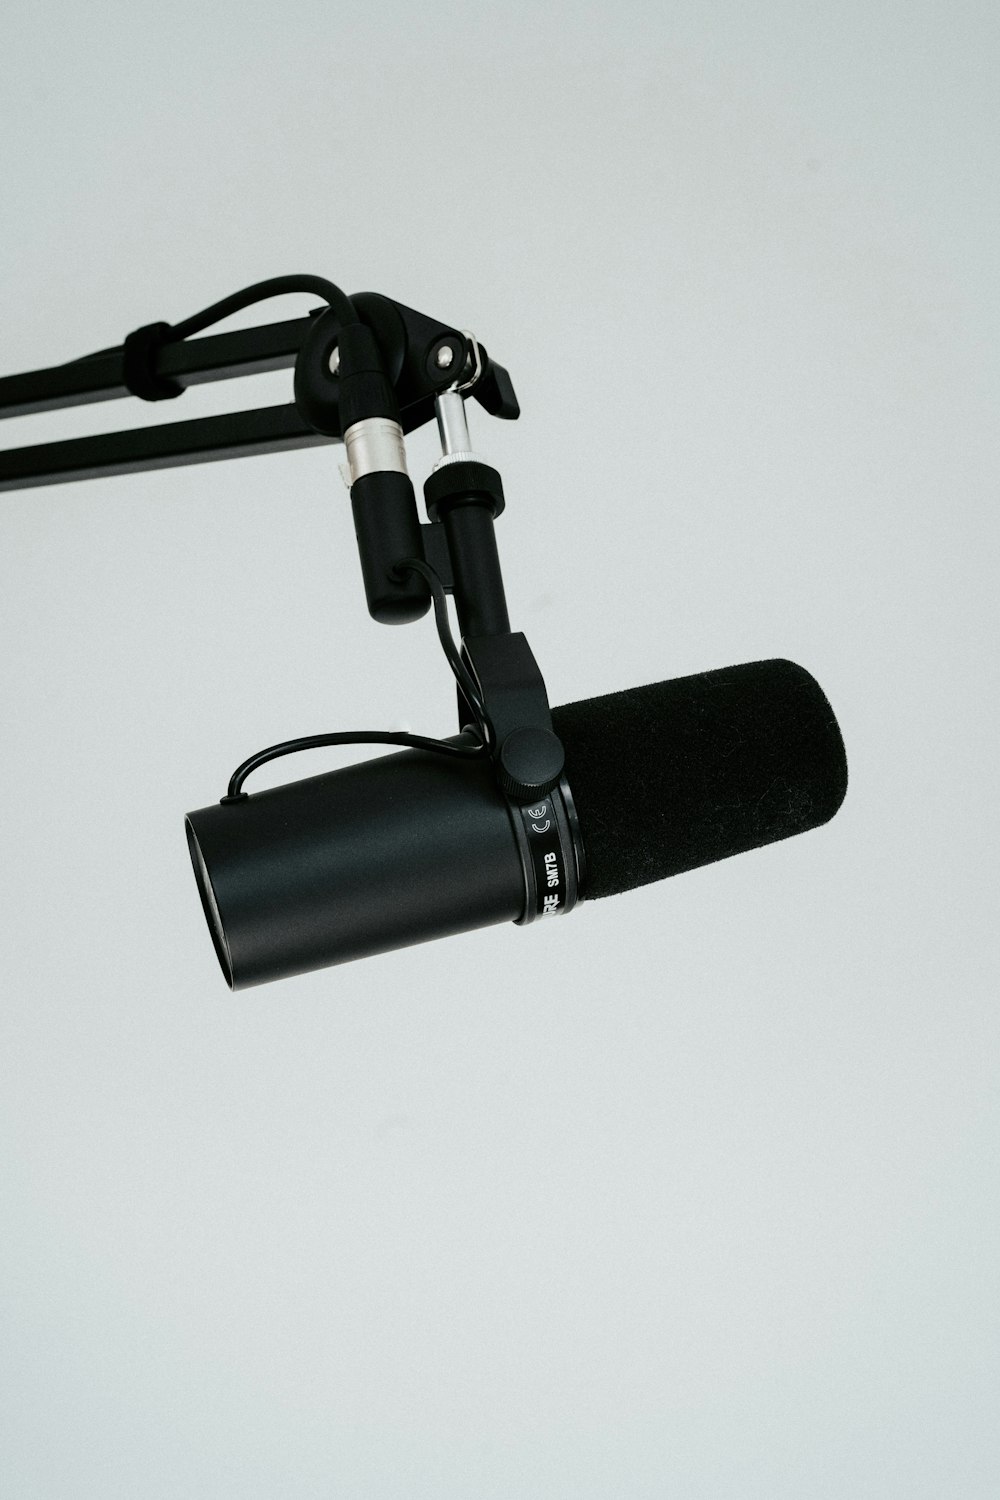 a close up of a microphone attached to a bike